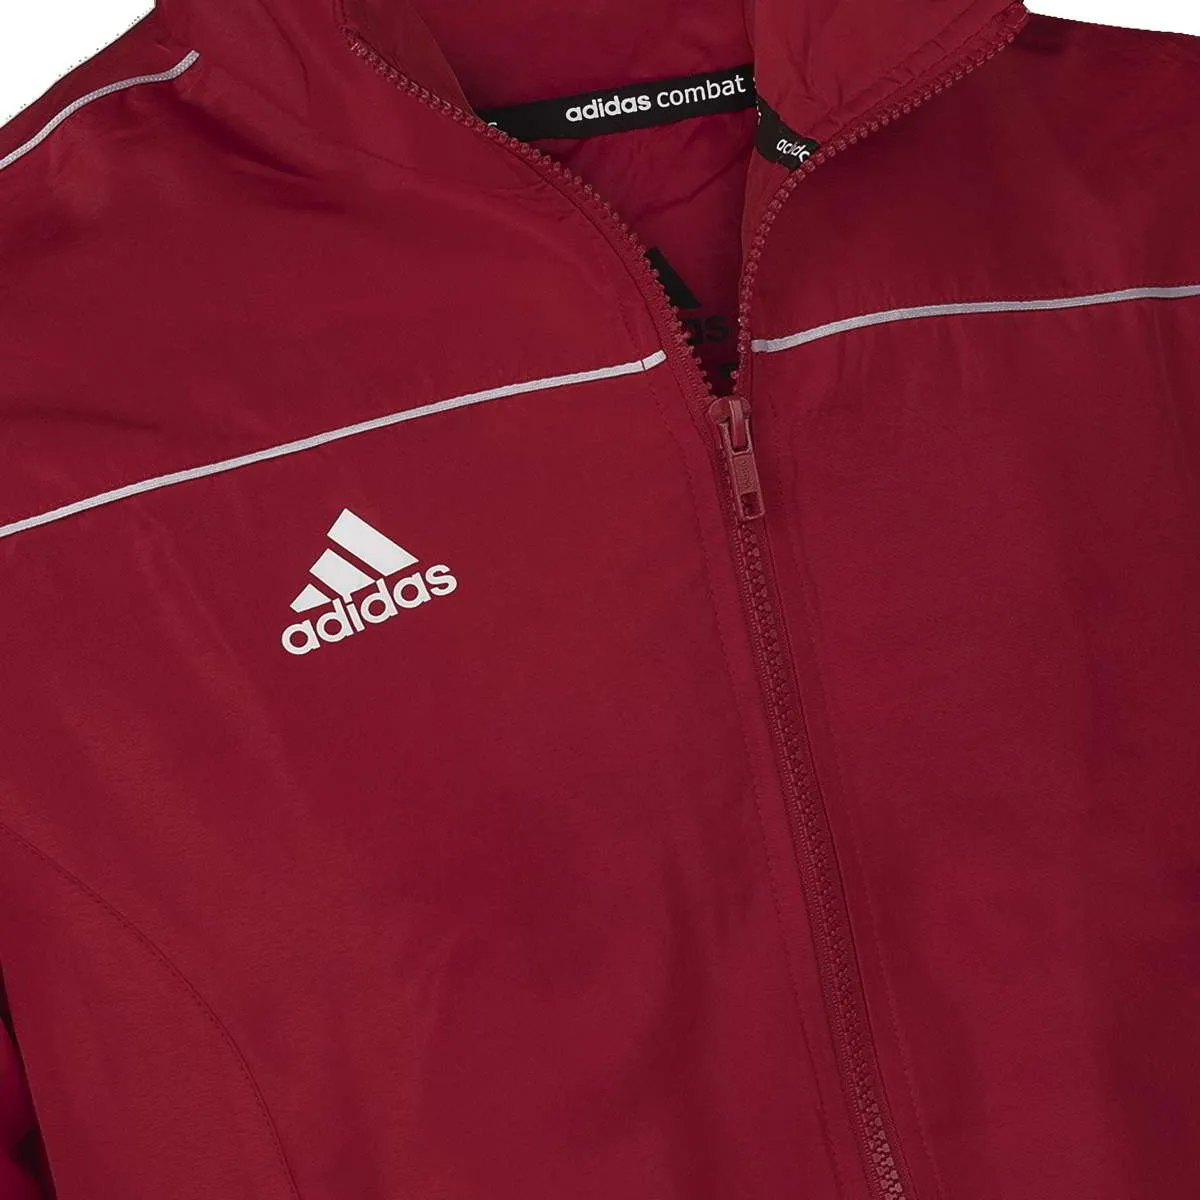 adidas track-suit top